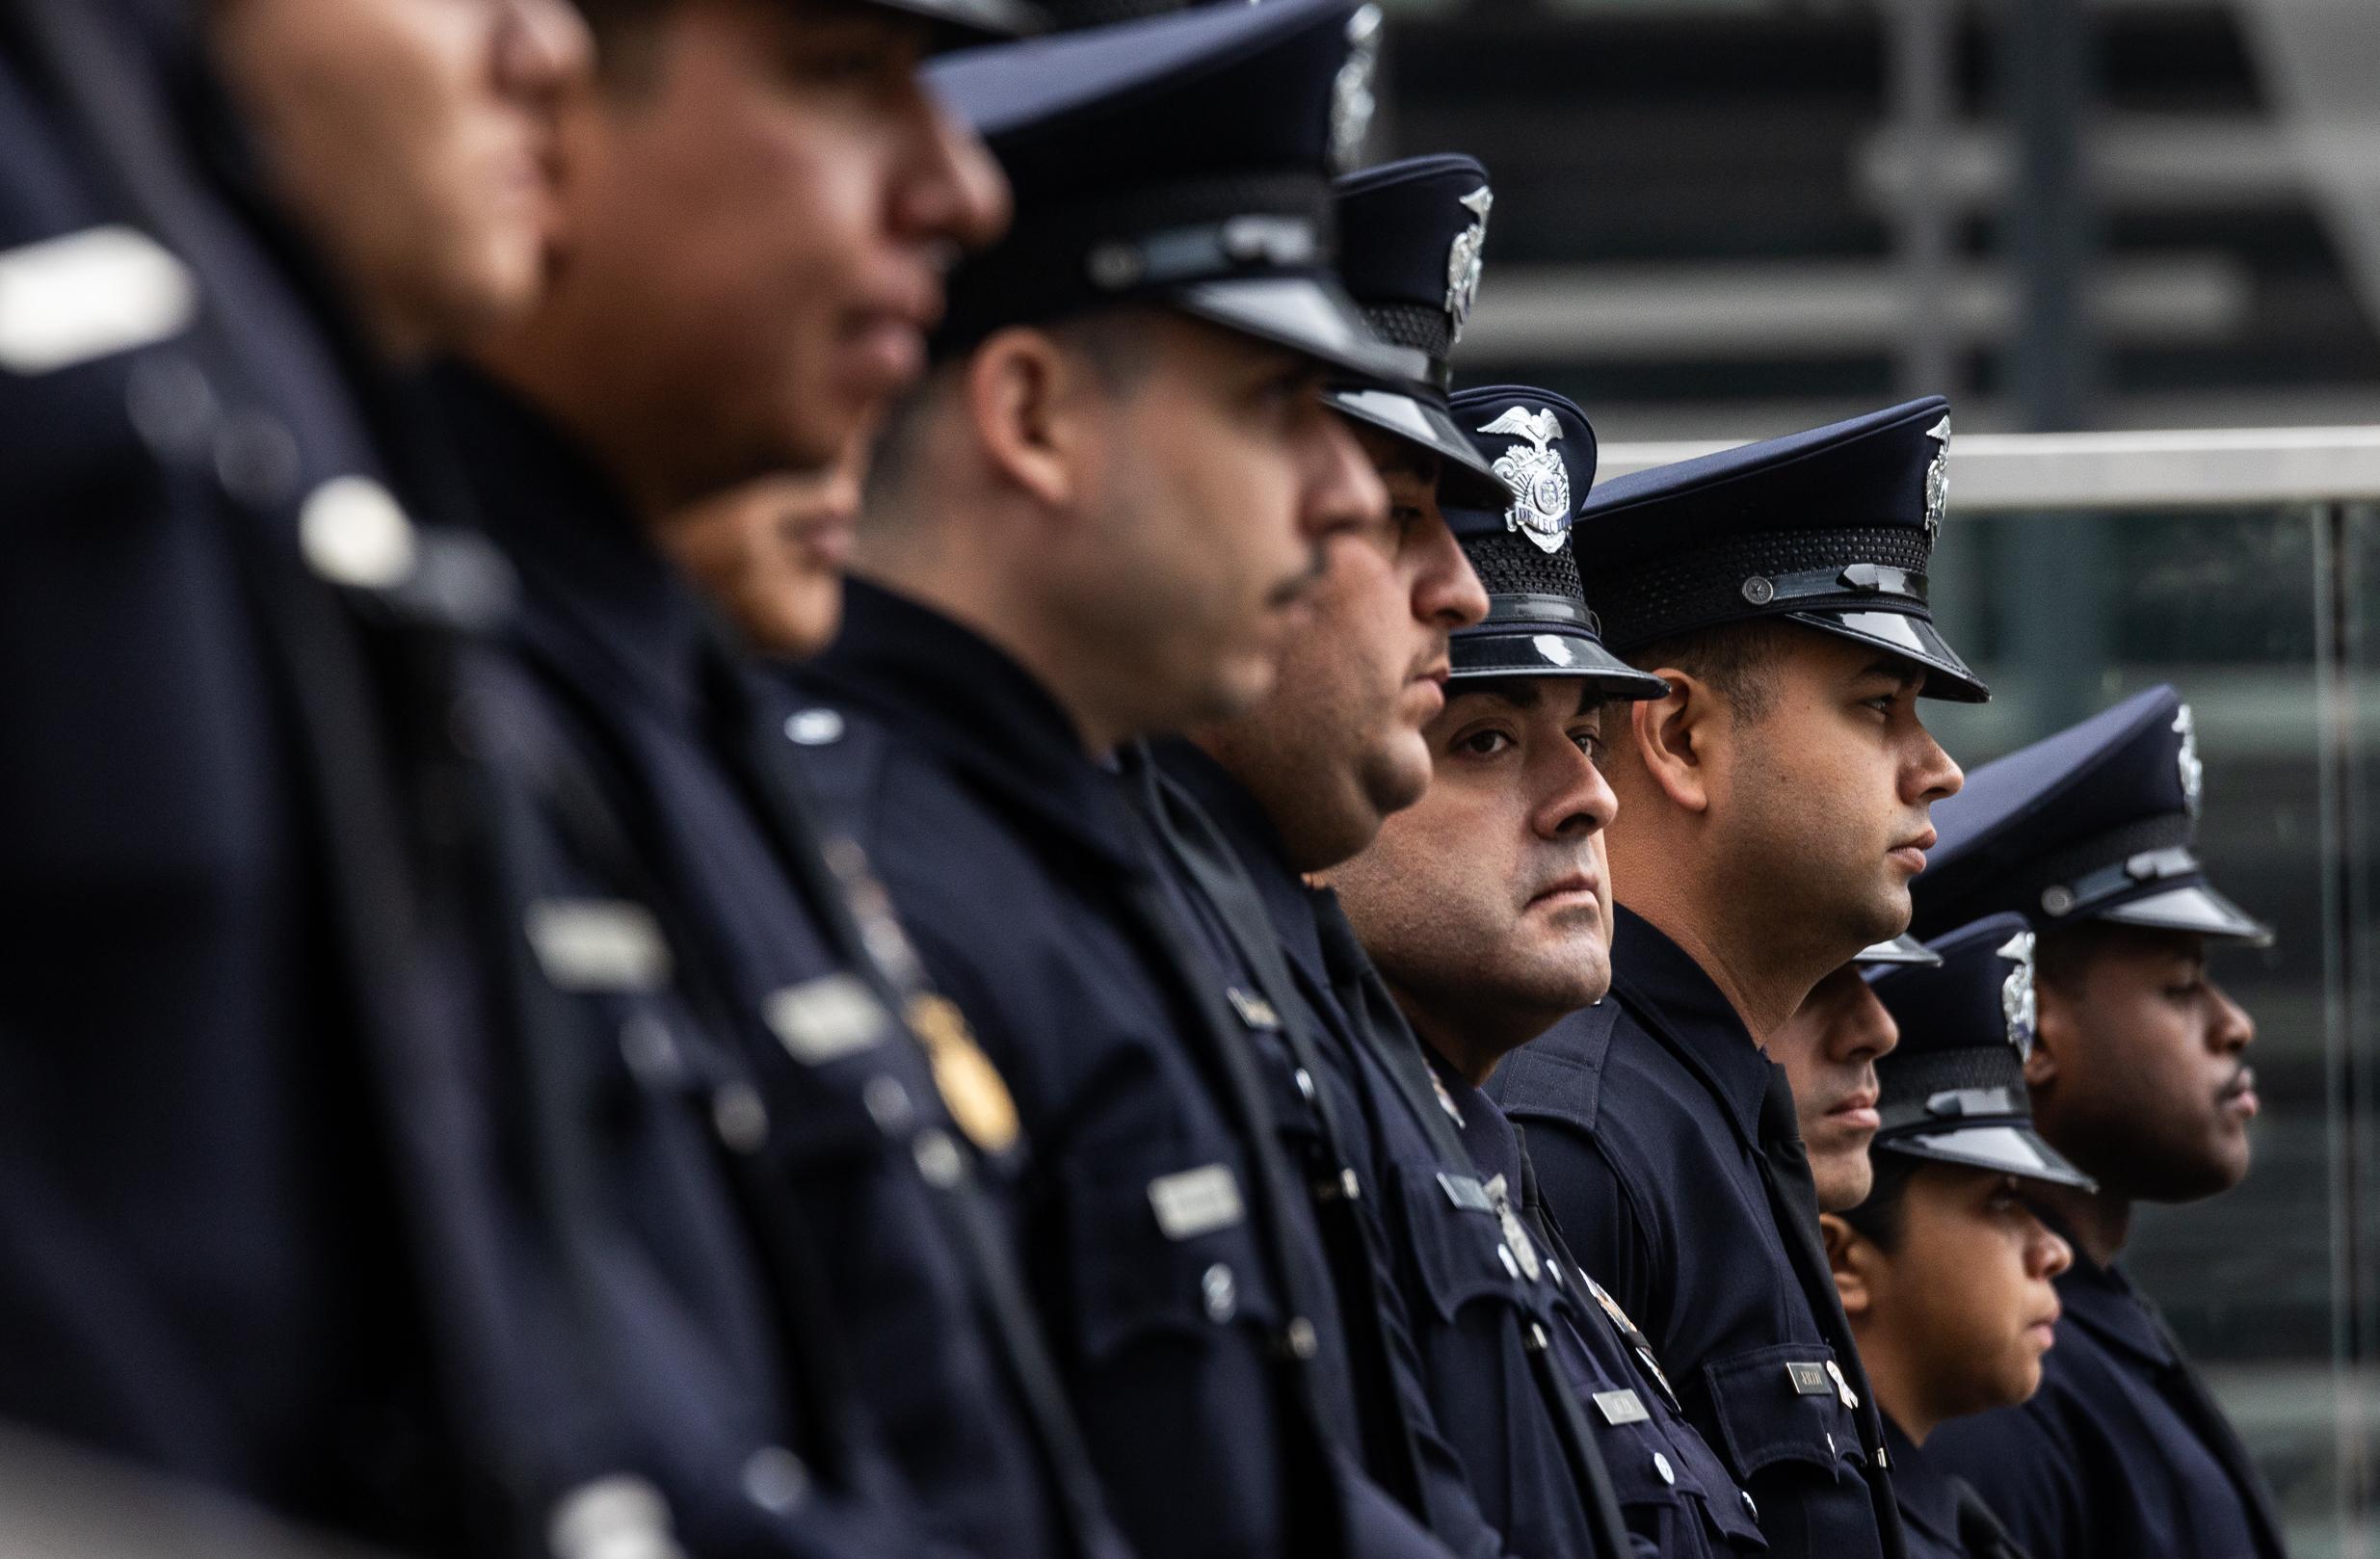 LAPD Honors Fallen Officers in Solemn Ceremony